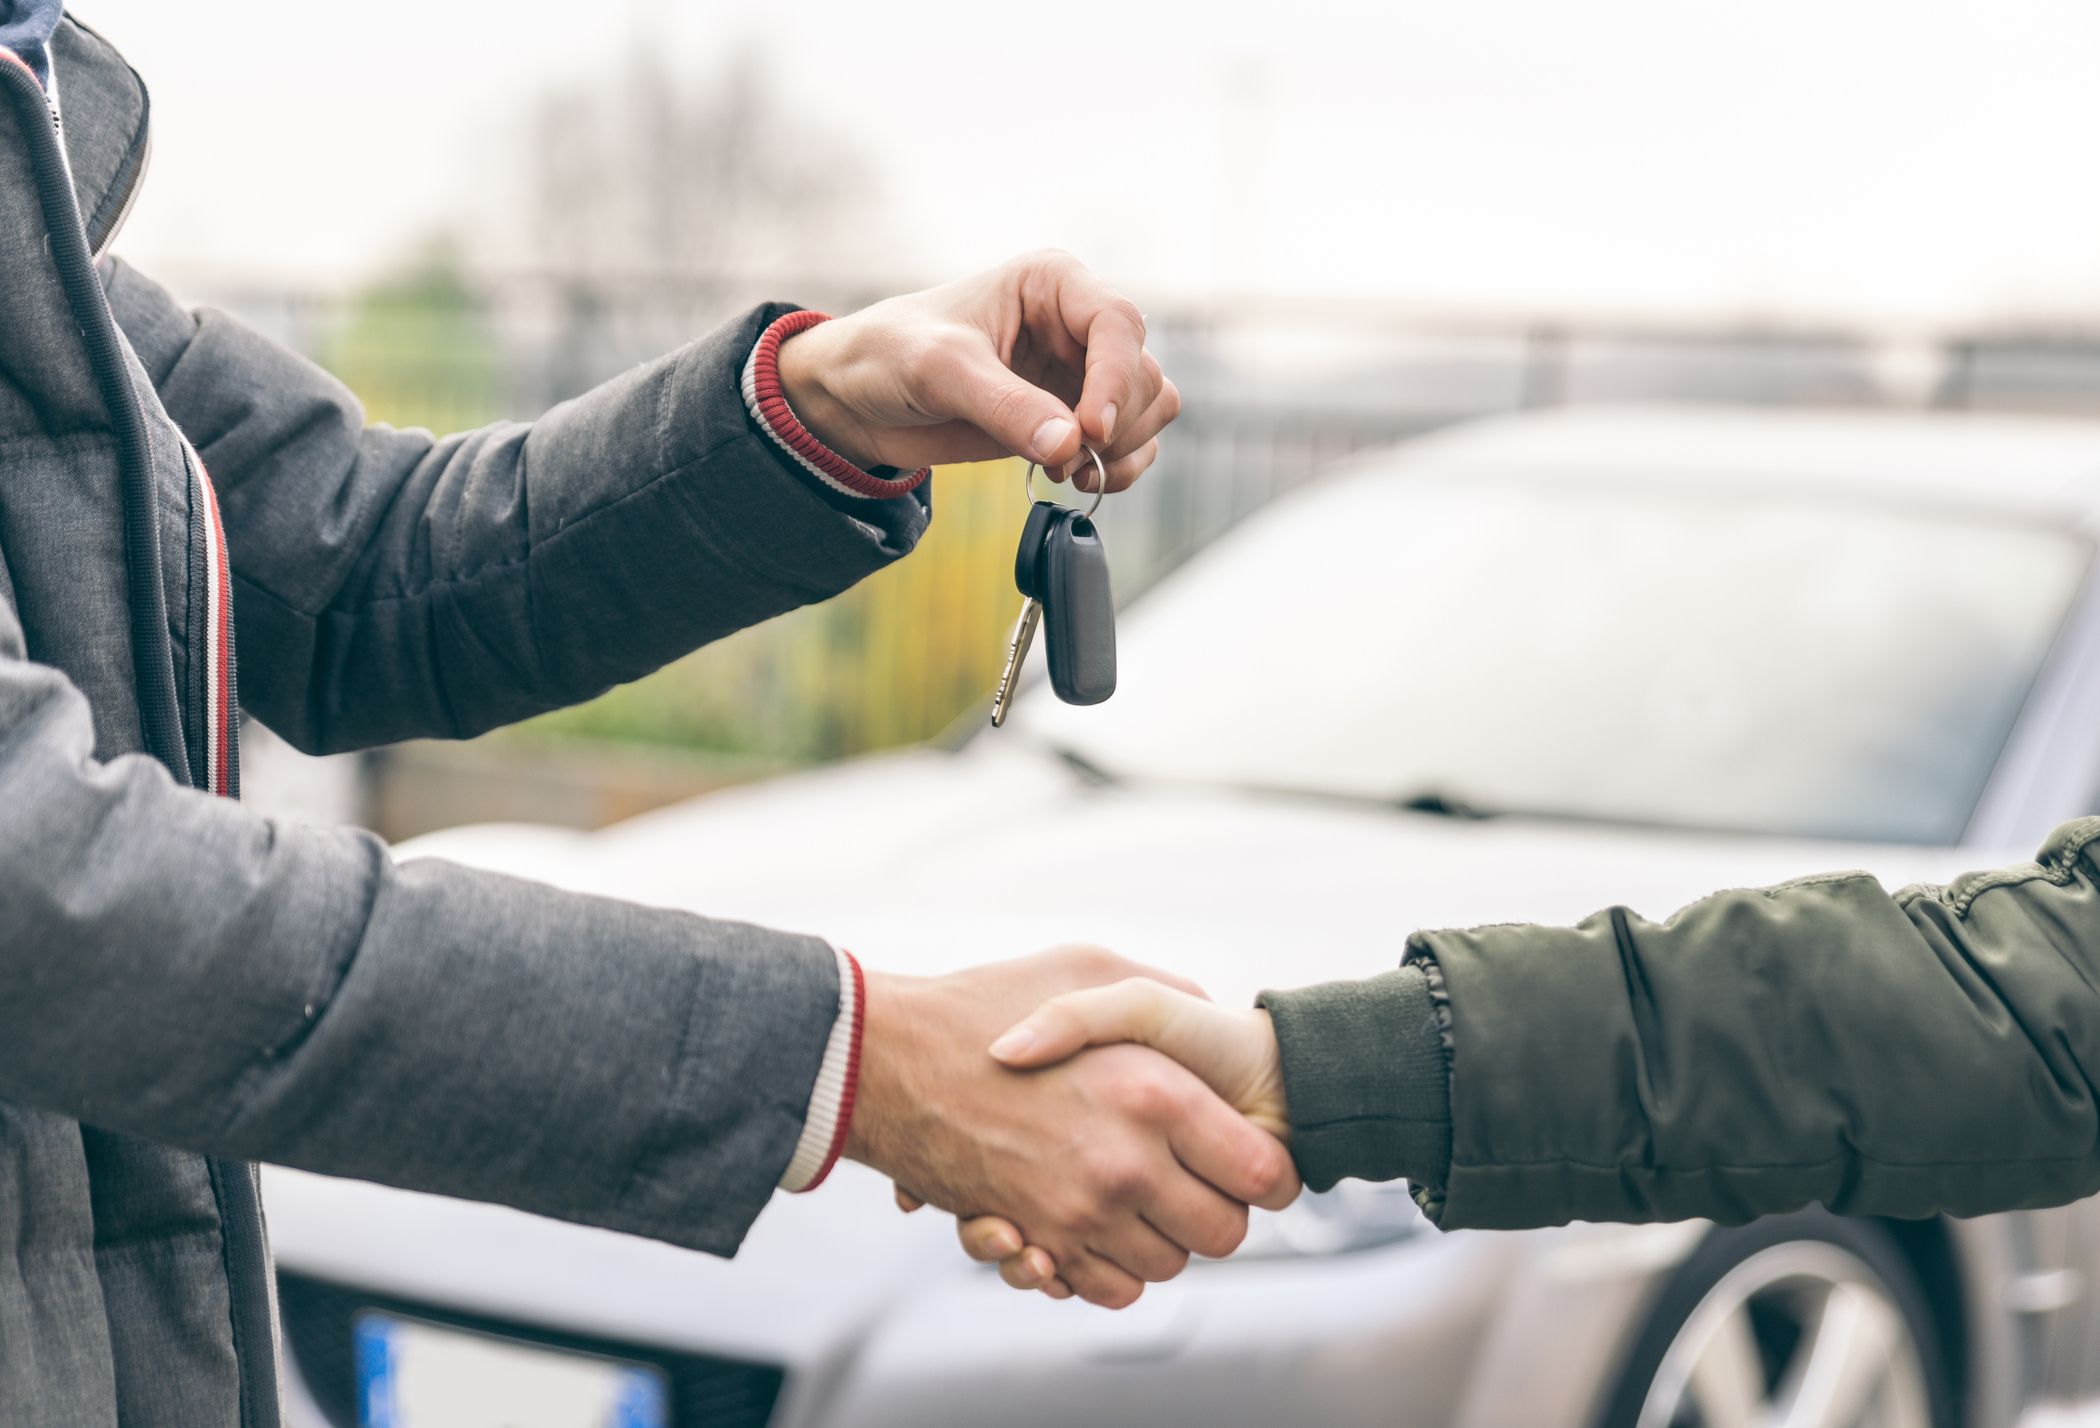 How Much Does A New Car Dealer Make On A Deal?